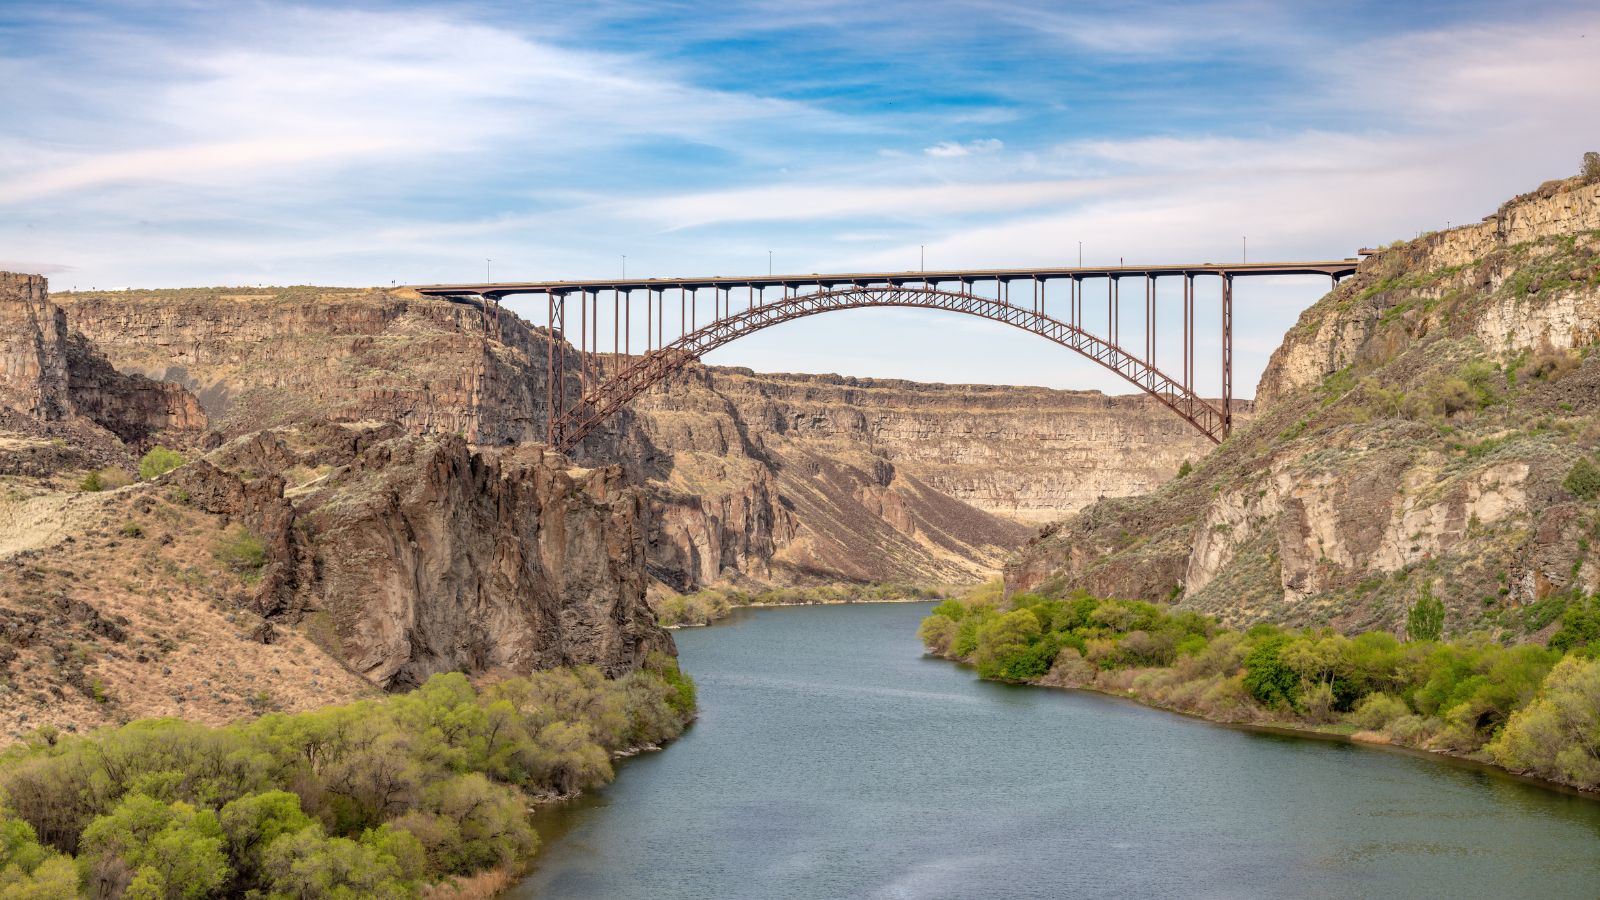 Iconic Bridge over the snake river